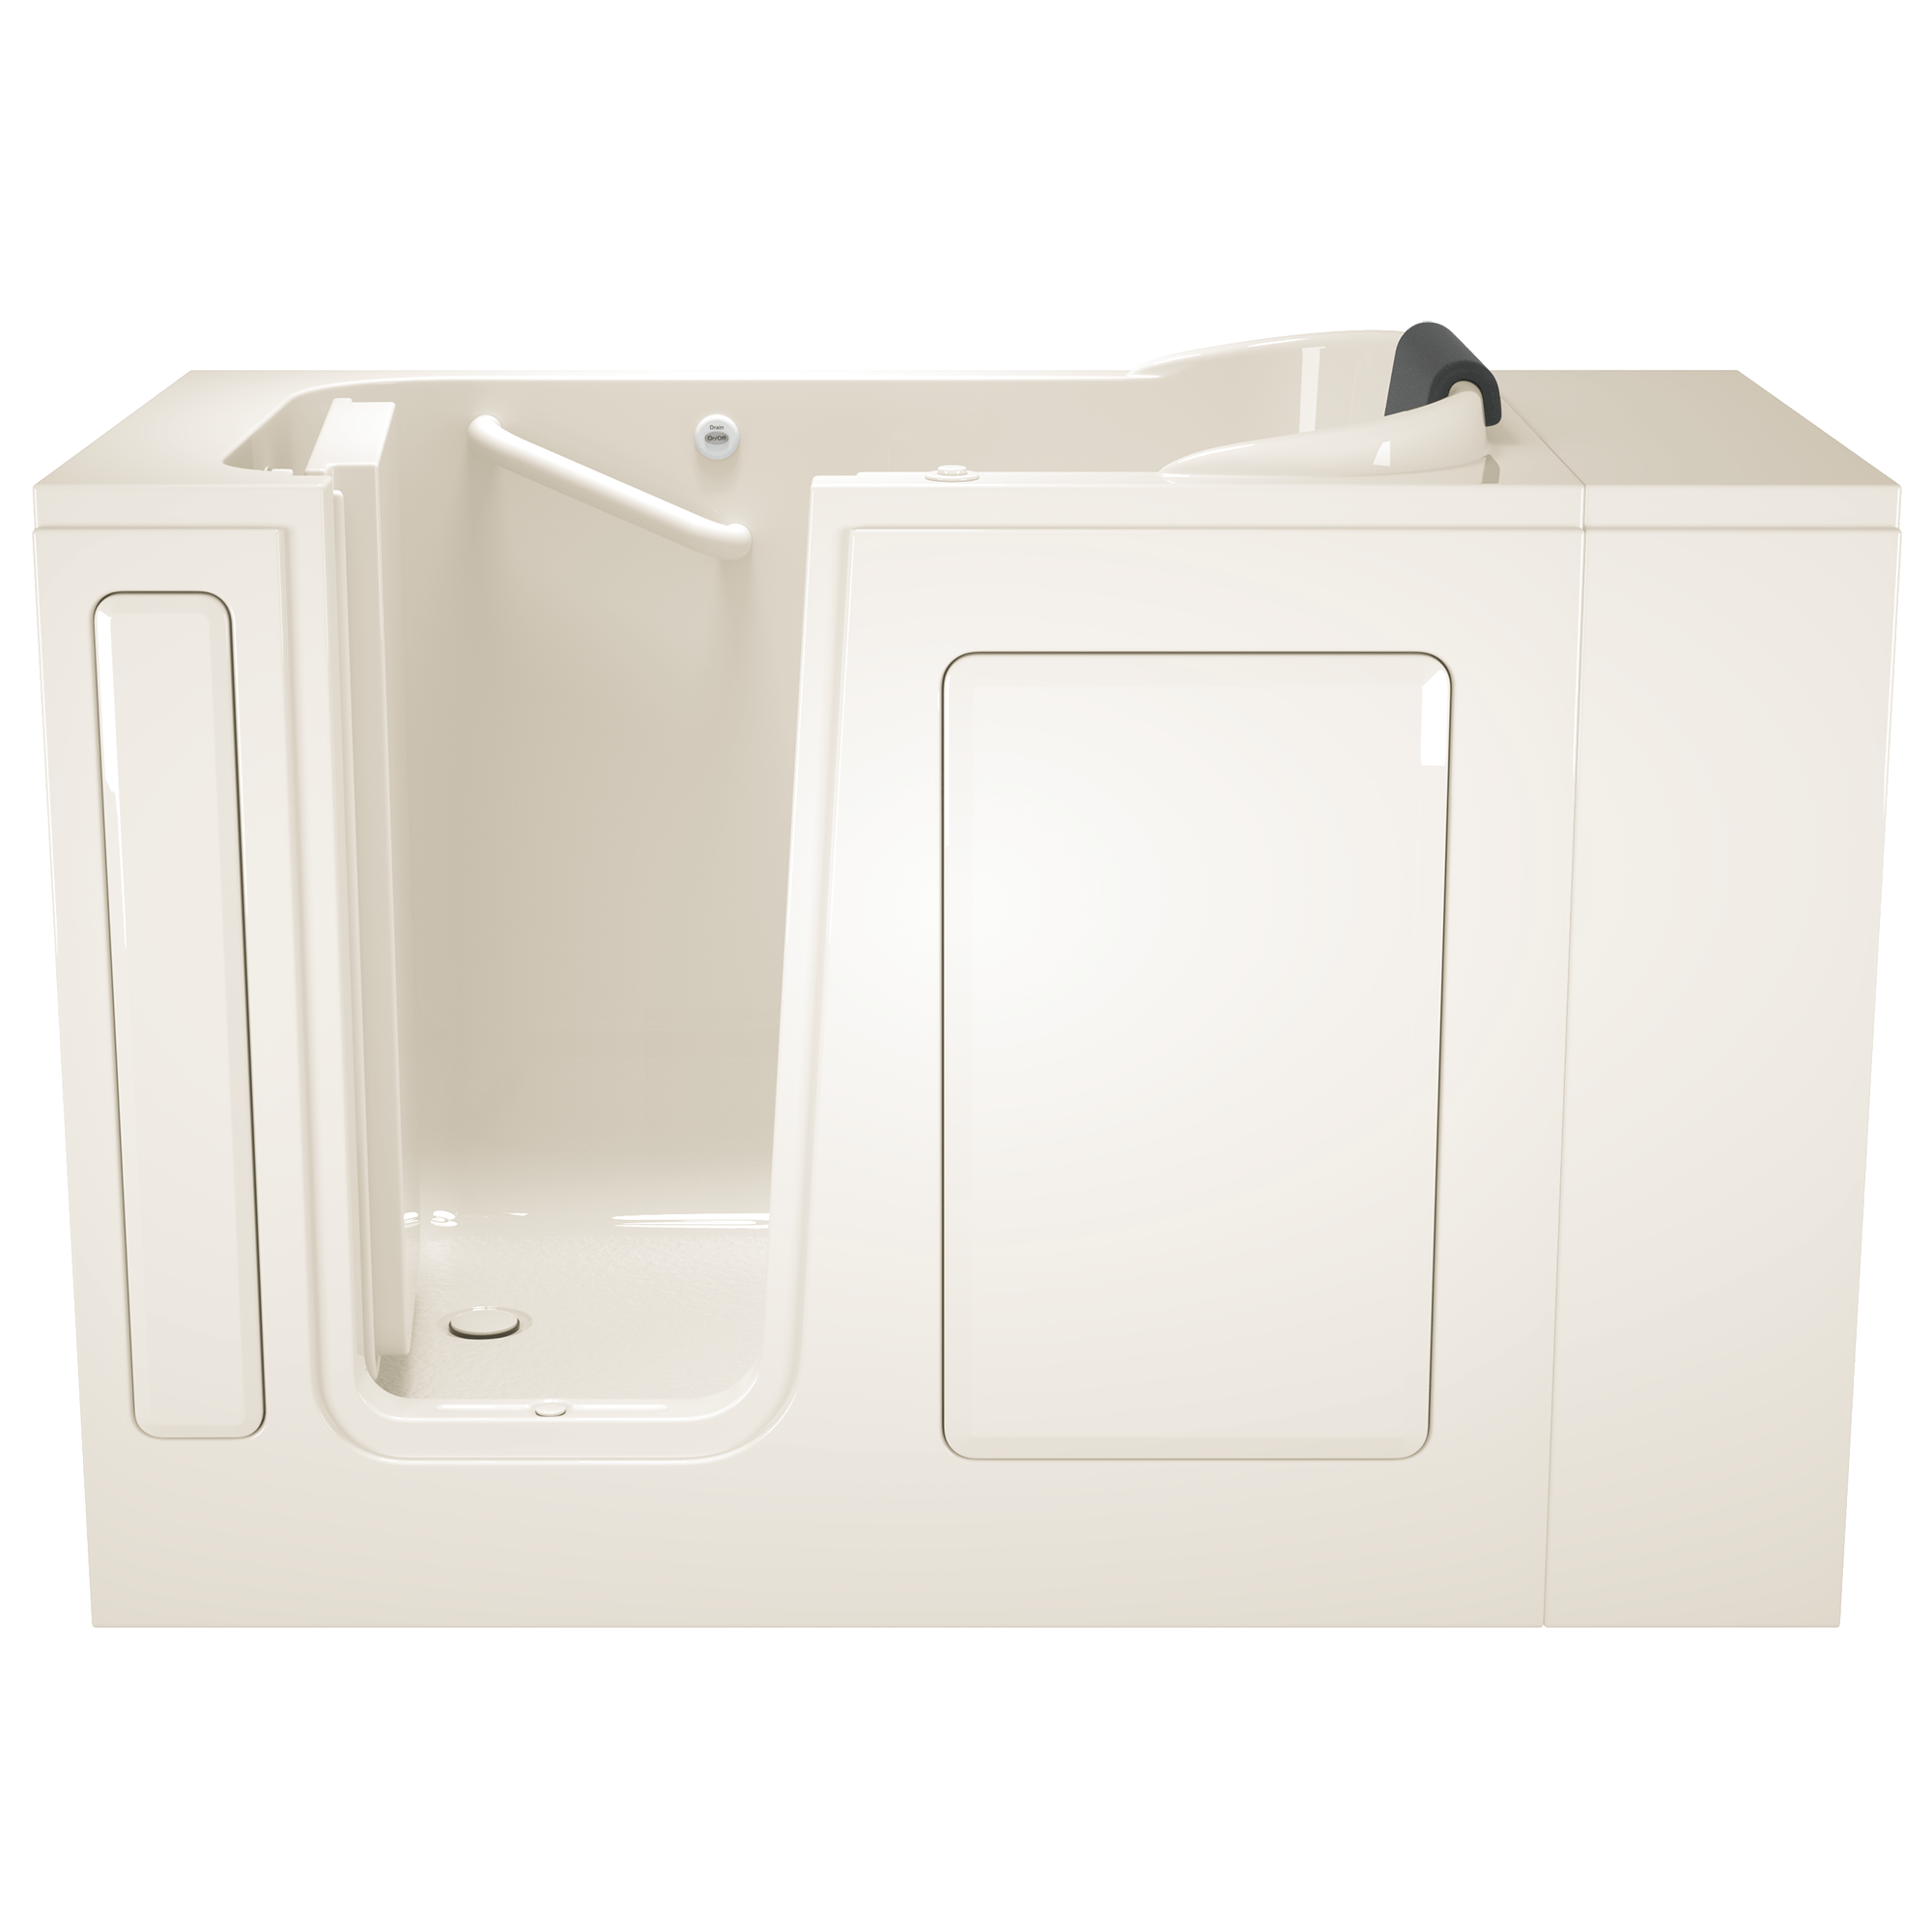 Gelcoat Premium Series 28 x 48-Inch Walk-in Tub With Whirlpool System - Left-Hand Drain